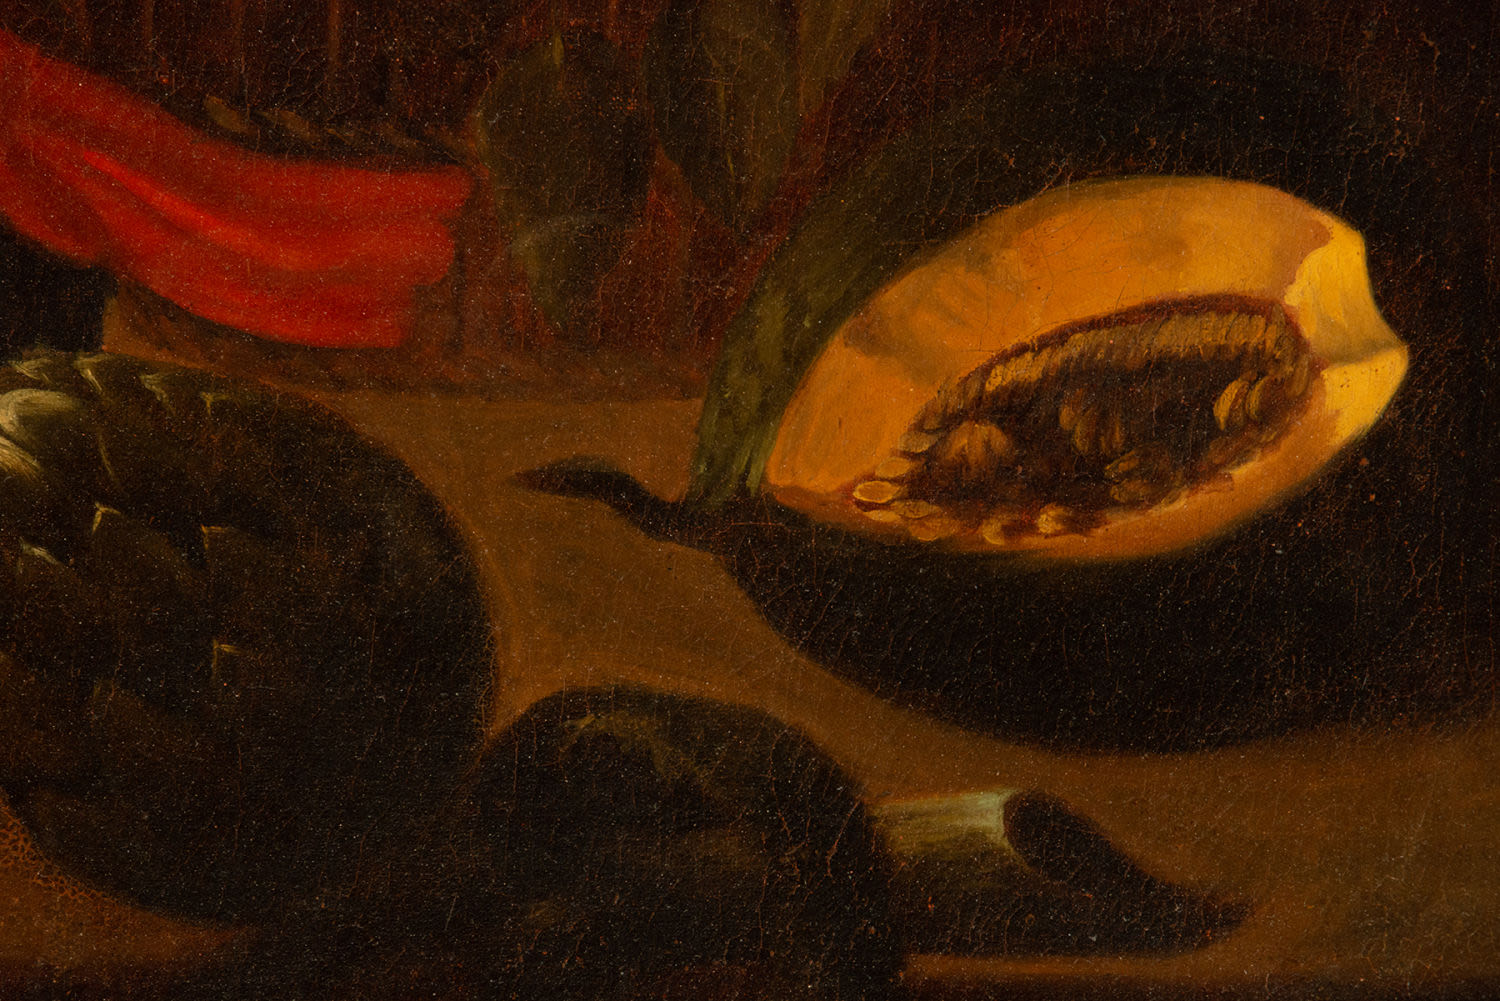 Still Life with Fruit and Lobster, 17th century Dutch school - Image 6 of 7